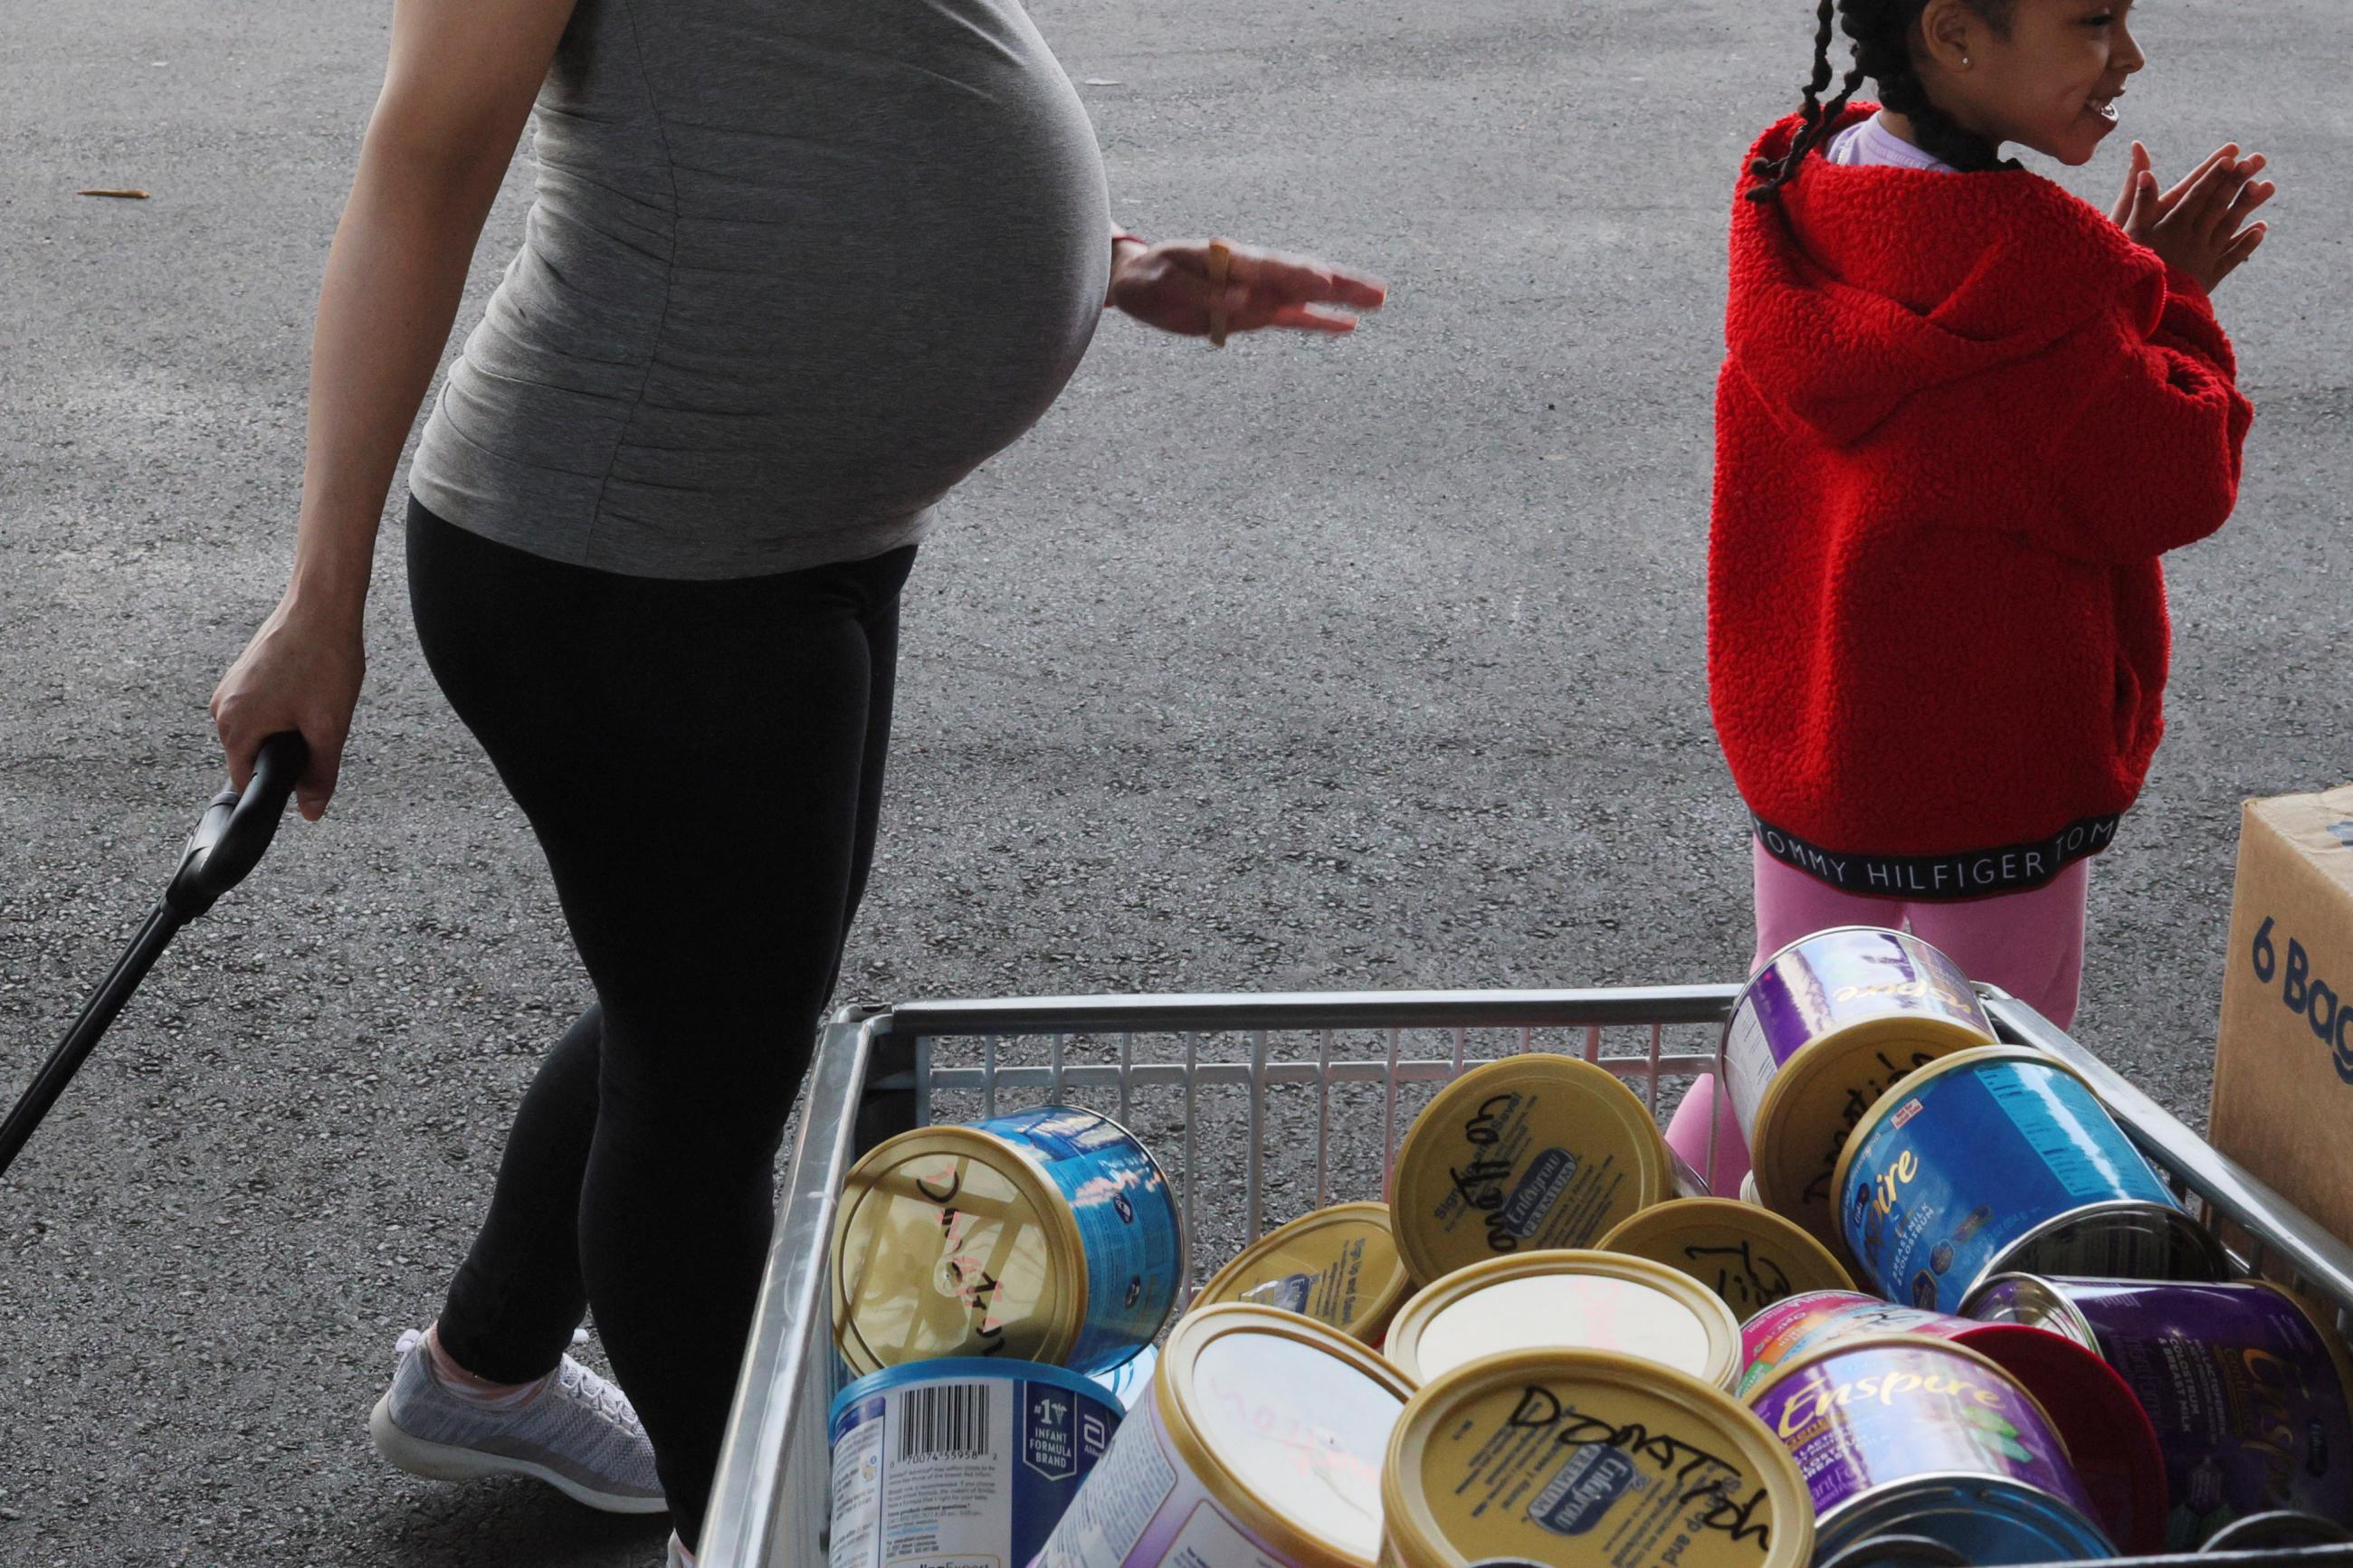 the silhouettes of a pregnant woman and her young daughter are seen against a gray pavement backdrop